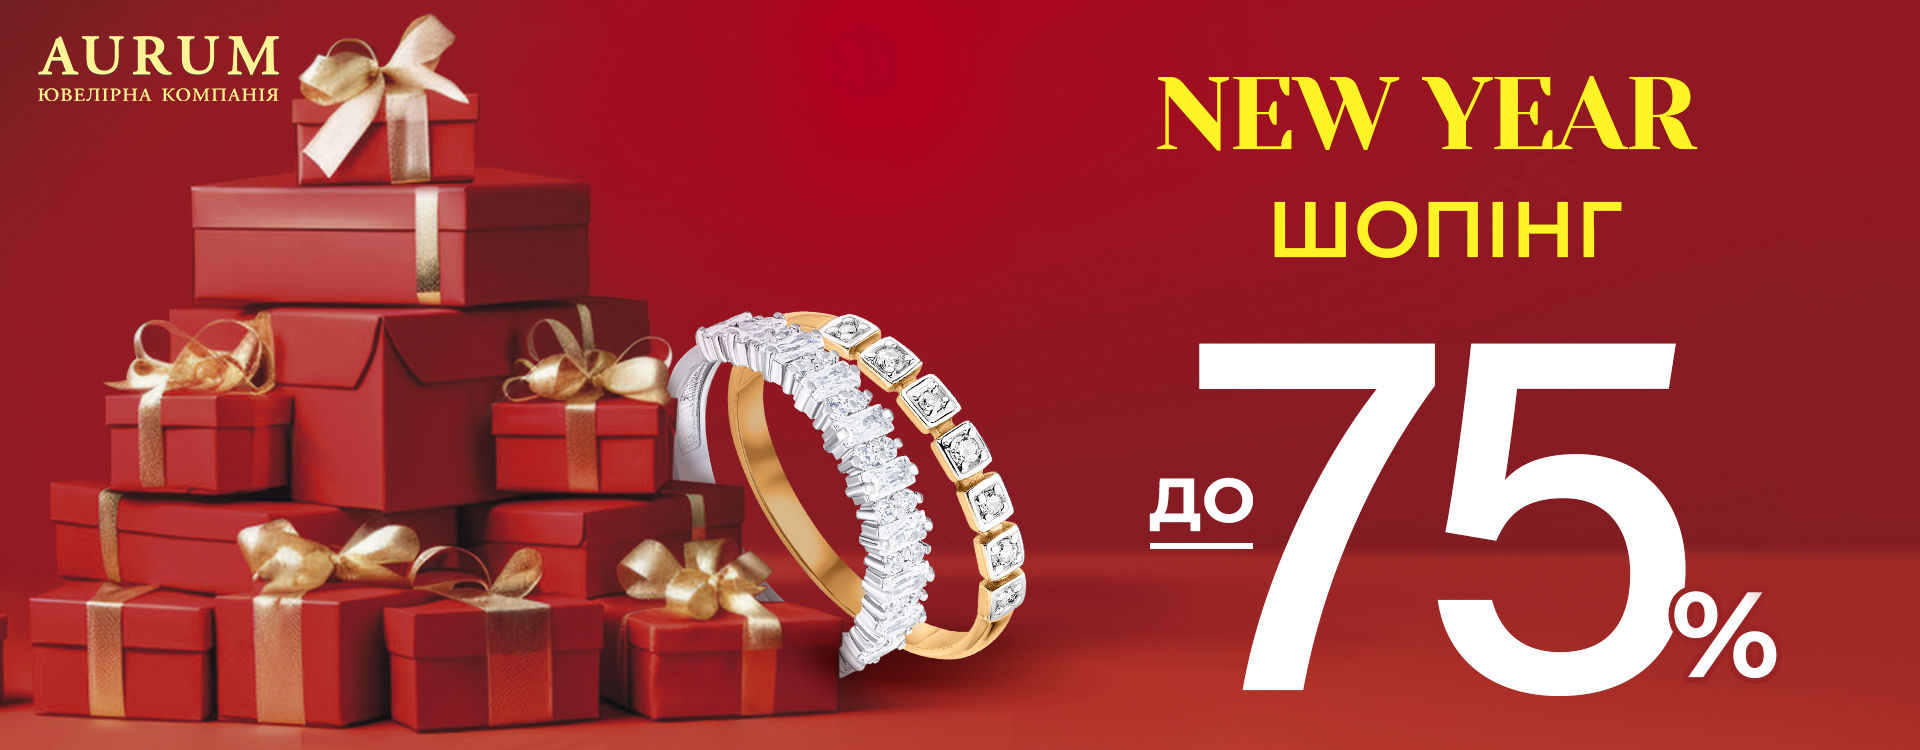 Visit AURUM for NEW YEAR SHOPPING